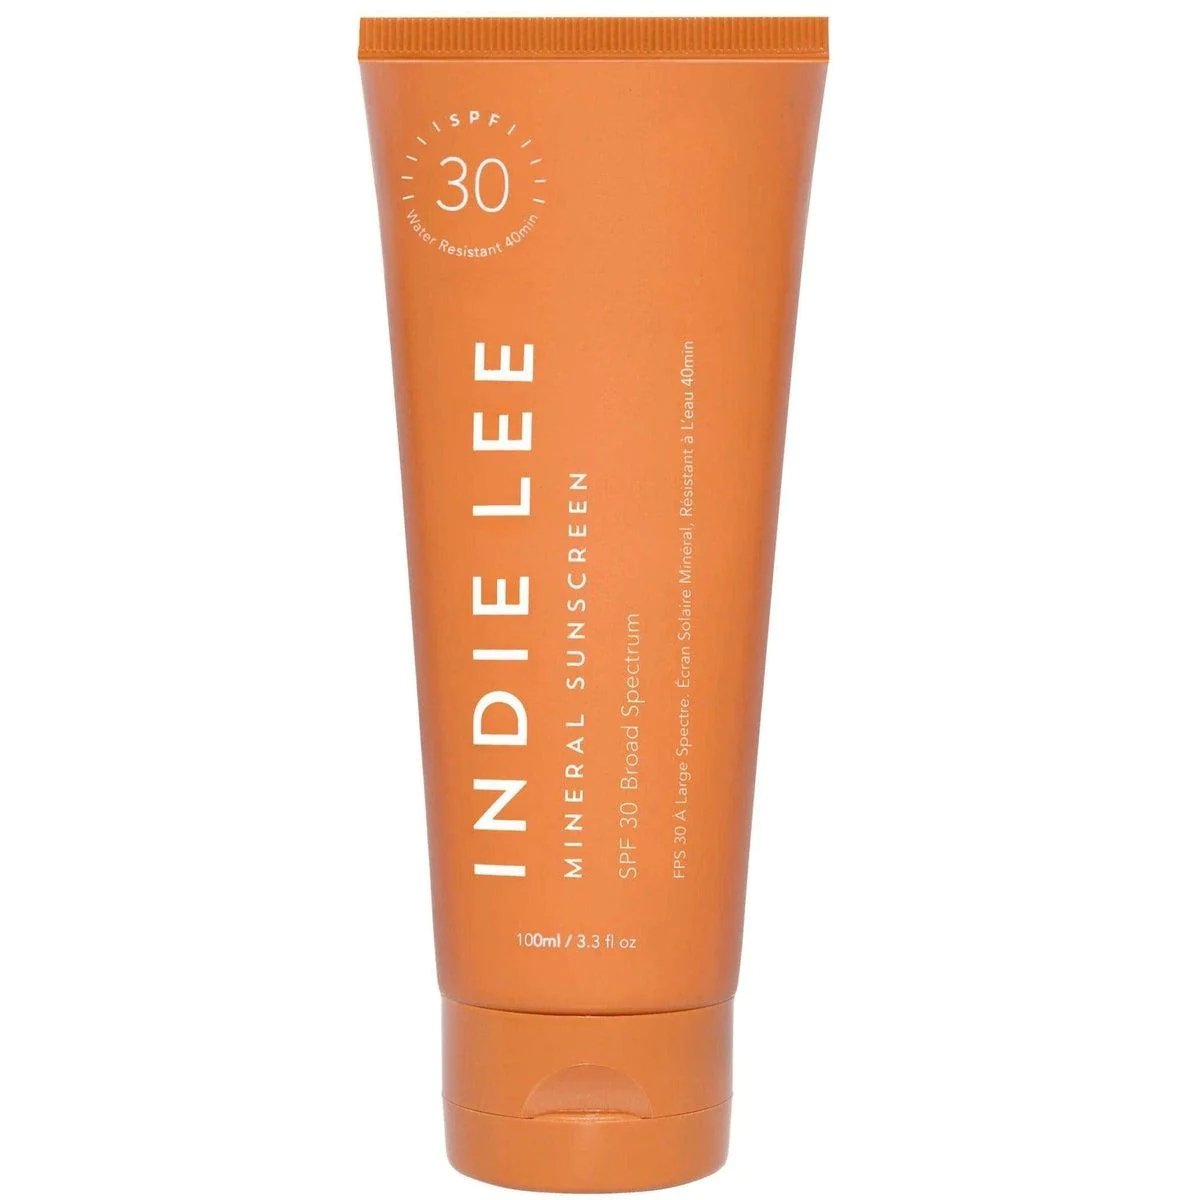 SPF 30 Mineral Sunscreen by Indie Lee